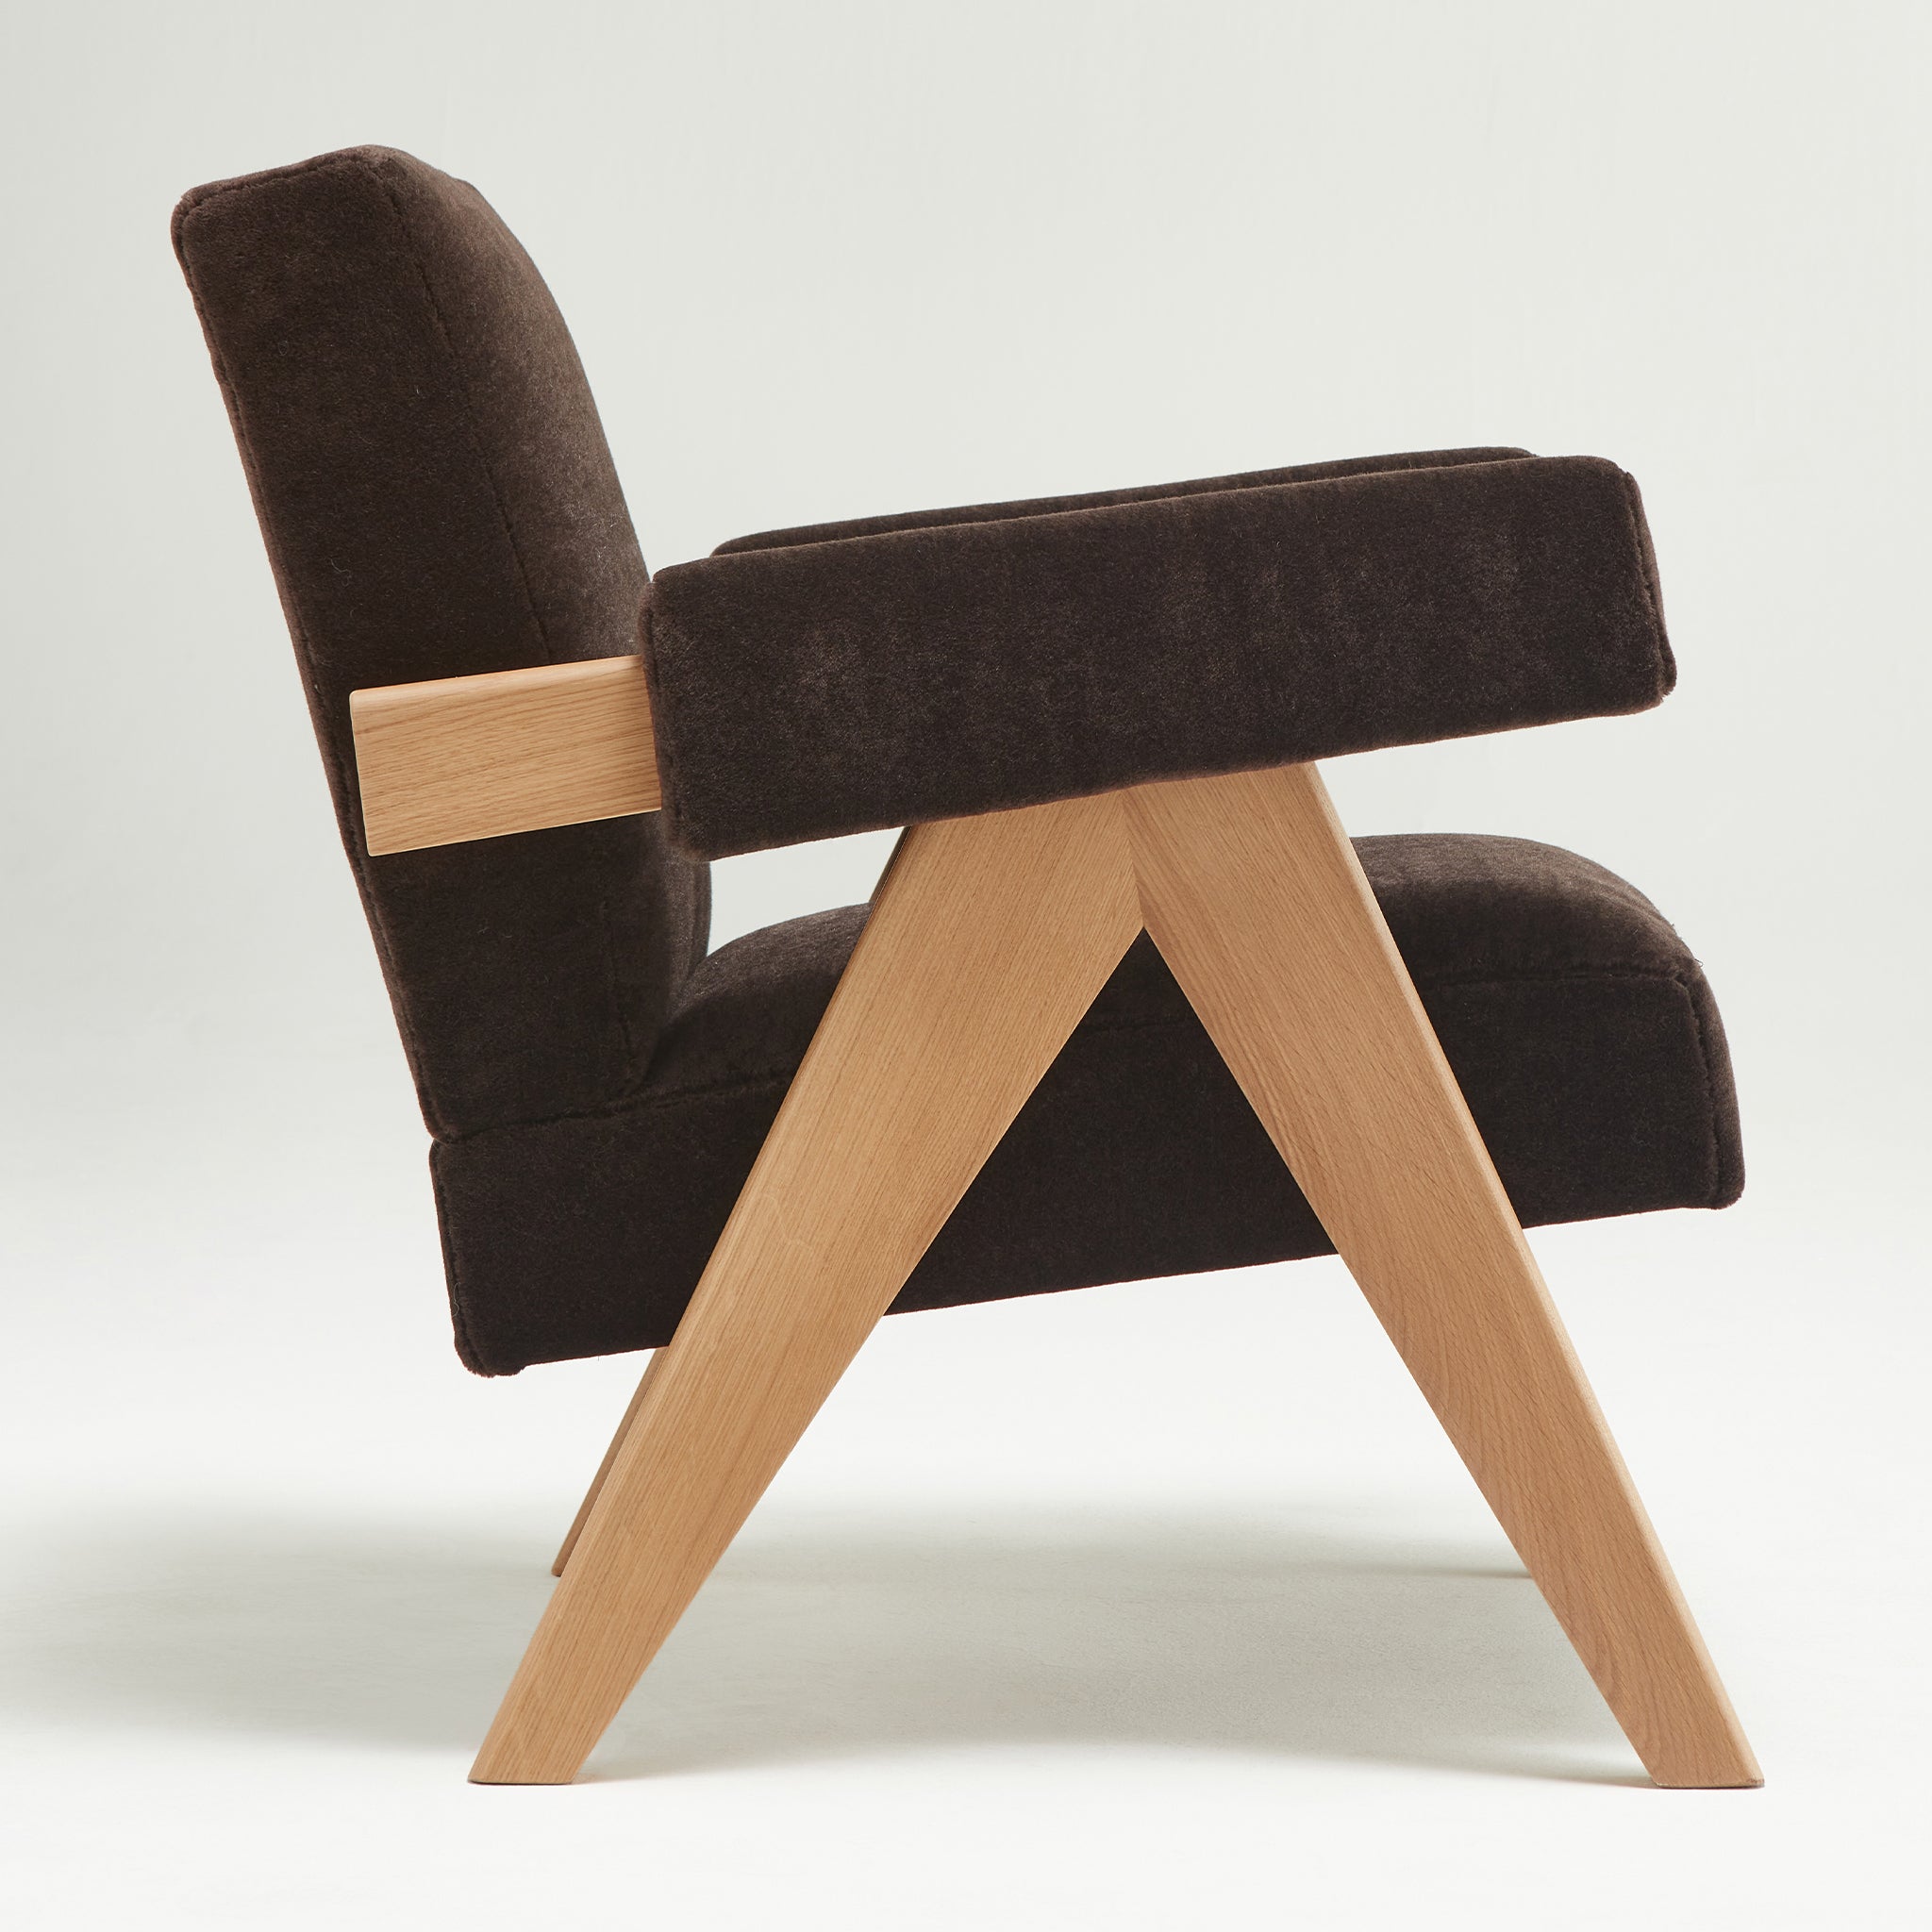 Side view of an authentic chandigarh lounge chair, pierre jeanneret era, natural oak frame, pierre frey choco teddy mohair upholstery, by Klarel #K35-31